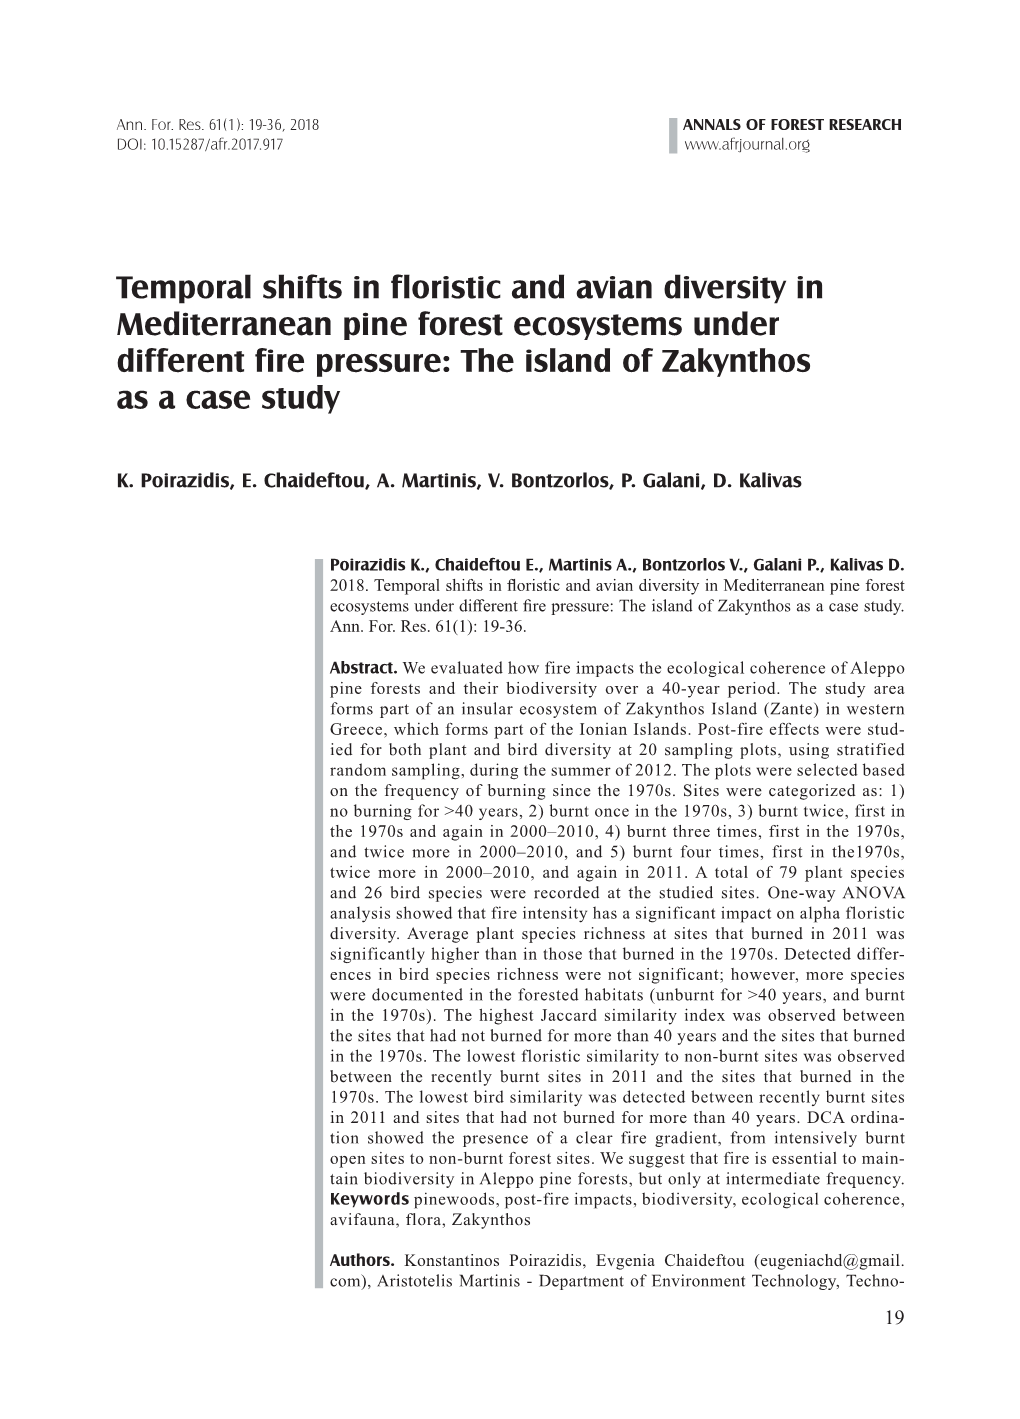 Temporal Shifts in Floristic and Avian Diversity in Mediterranean Pine Forest Ecosystems Under Different Fire Pressure: the Island of Zakynthos As a Case Study